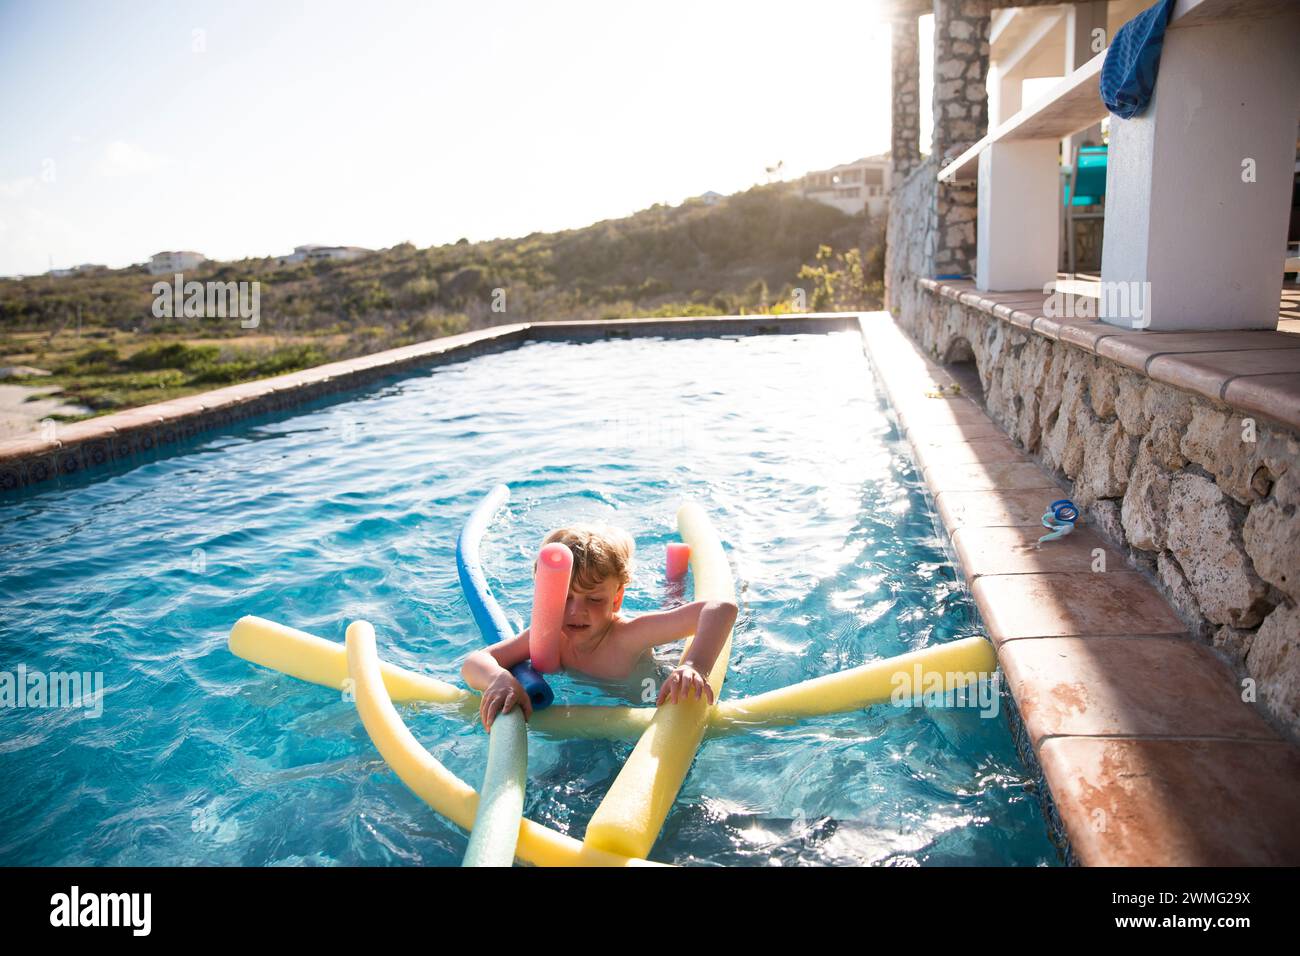 Young Boy Swims With Pool Noodles in Infinity Pool Stock Photo